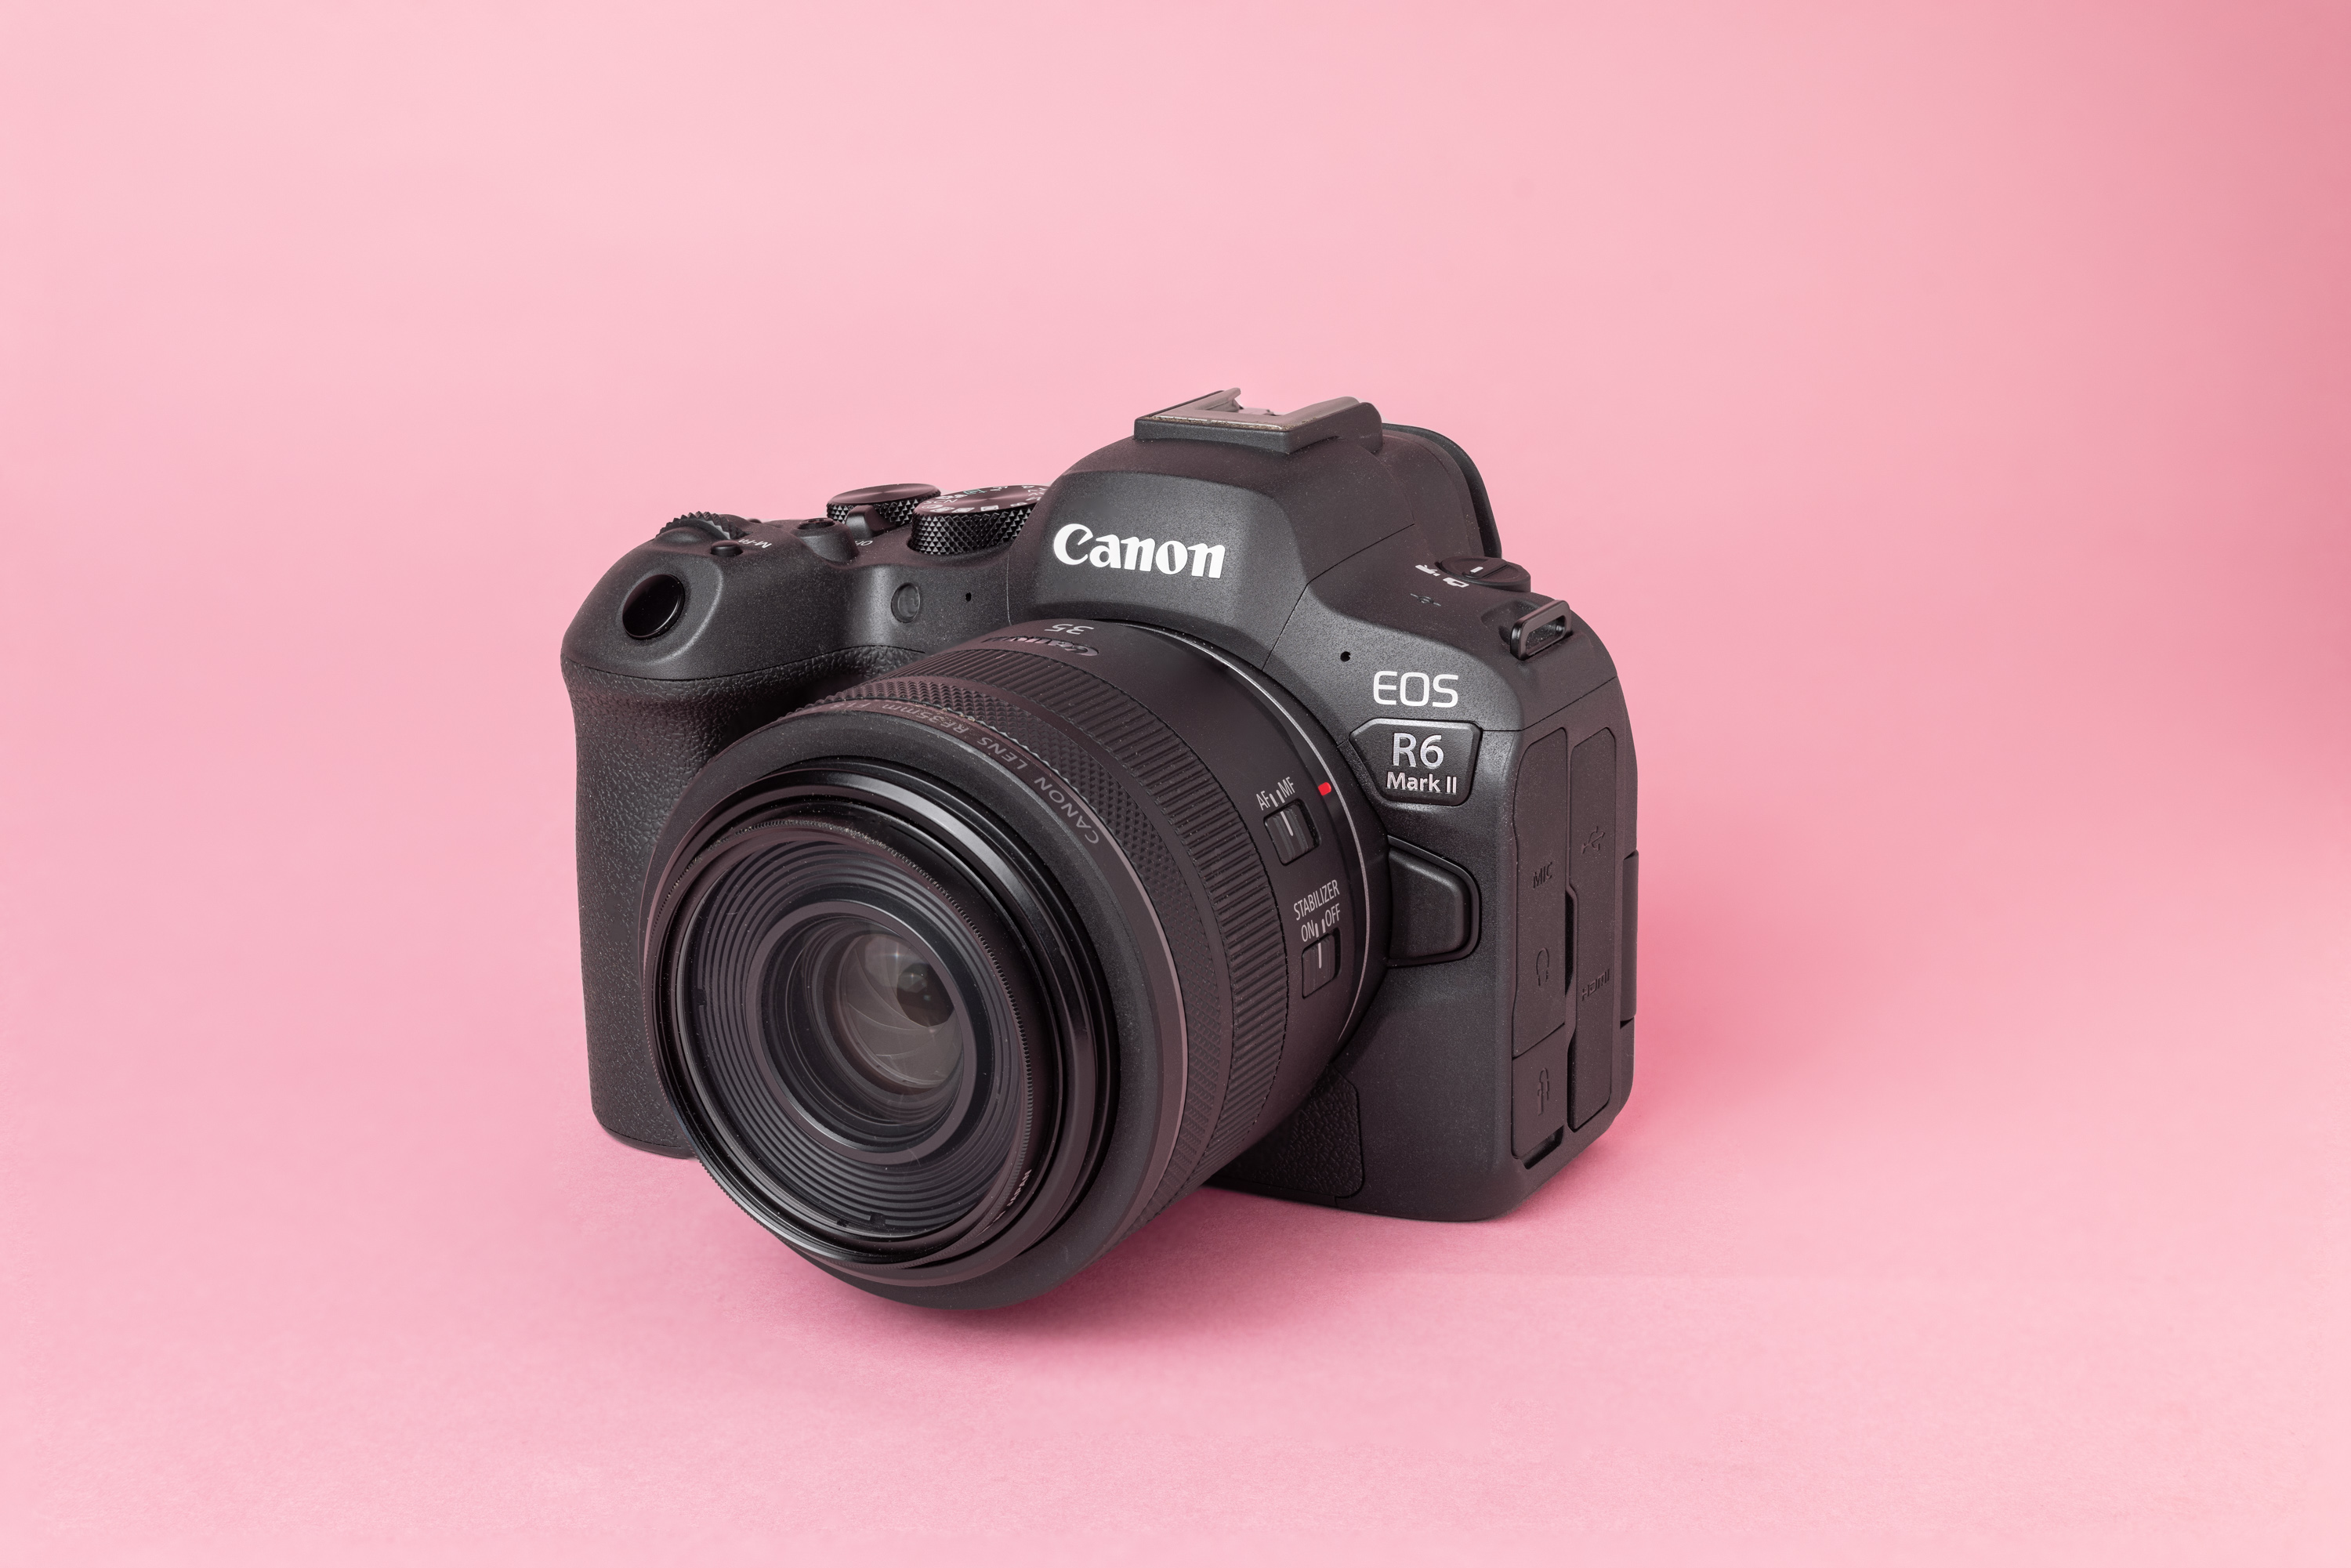 https://www.cnet.com/a/img/hub/2023/01/26/c72313e2-806d-4ce3-8783-5c288d8fdf6f/canon-r6-ii-review-cnet-best-camera.jpg